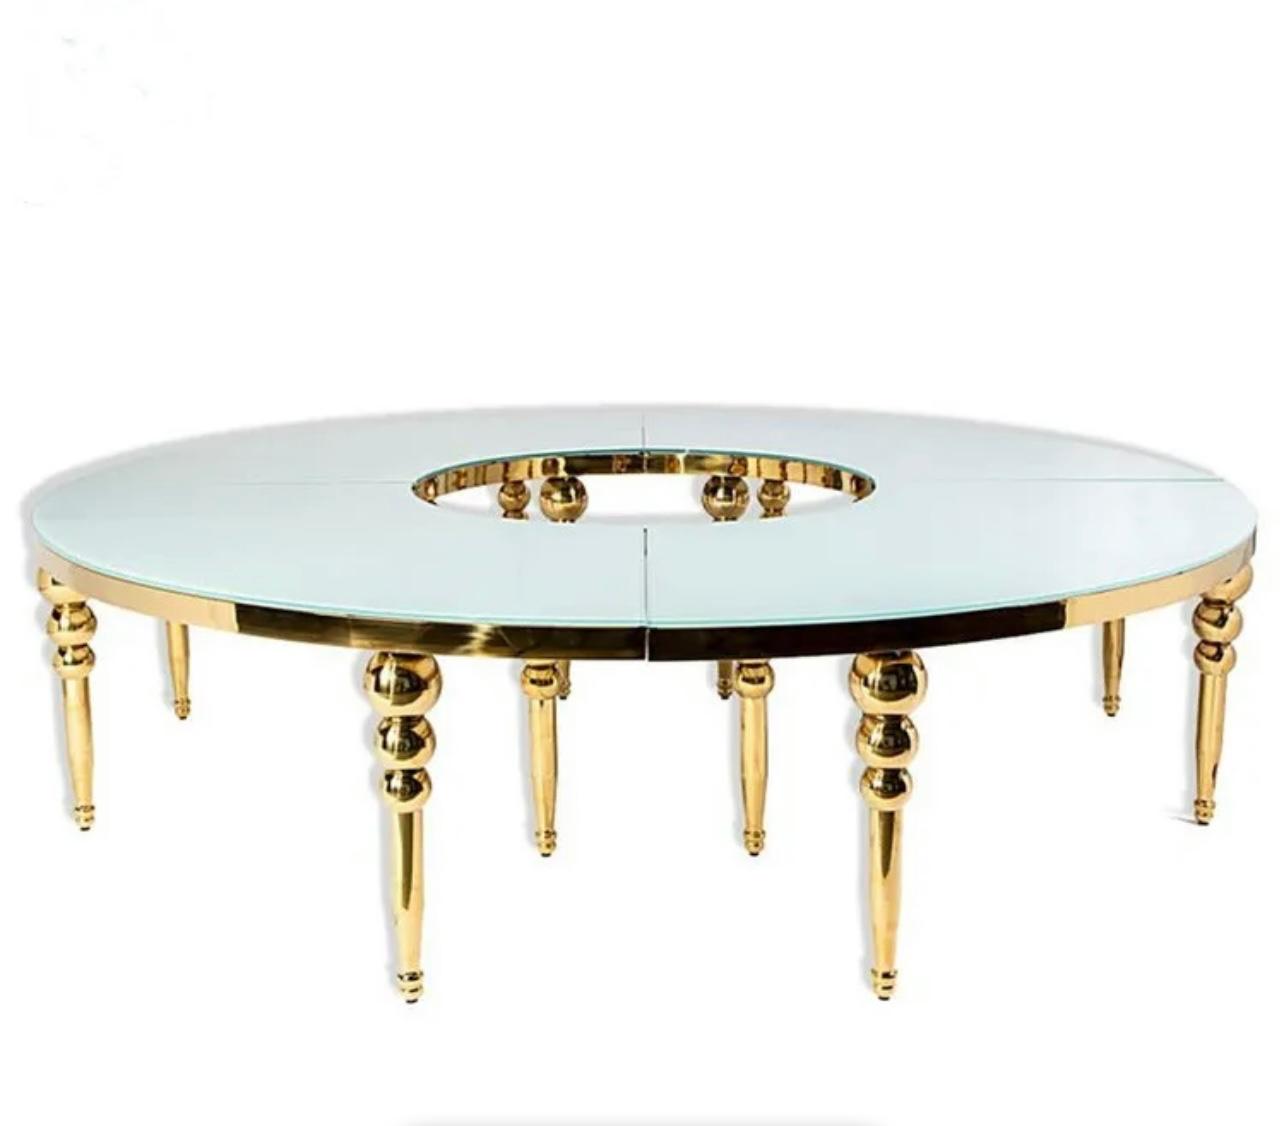 Luxurious glass and gold large O shape table with elegant design, perfect for upscale events.